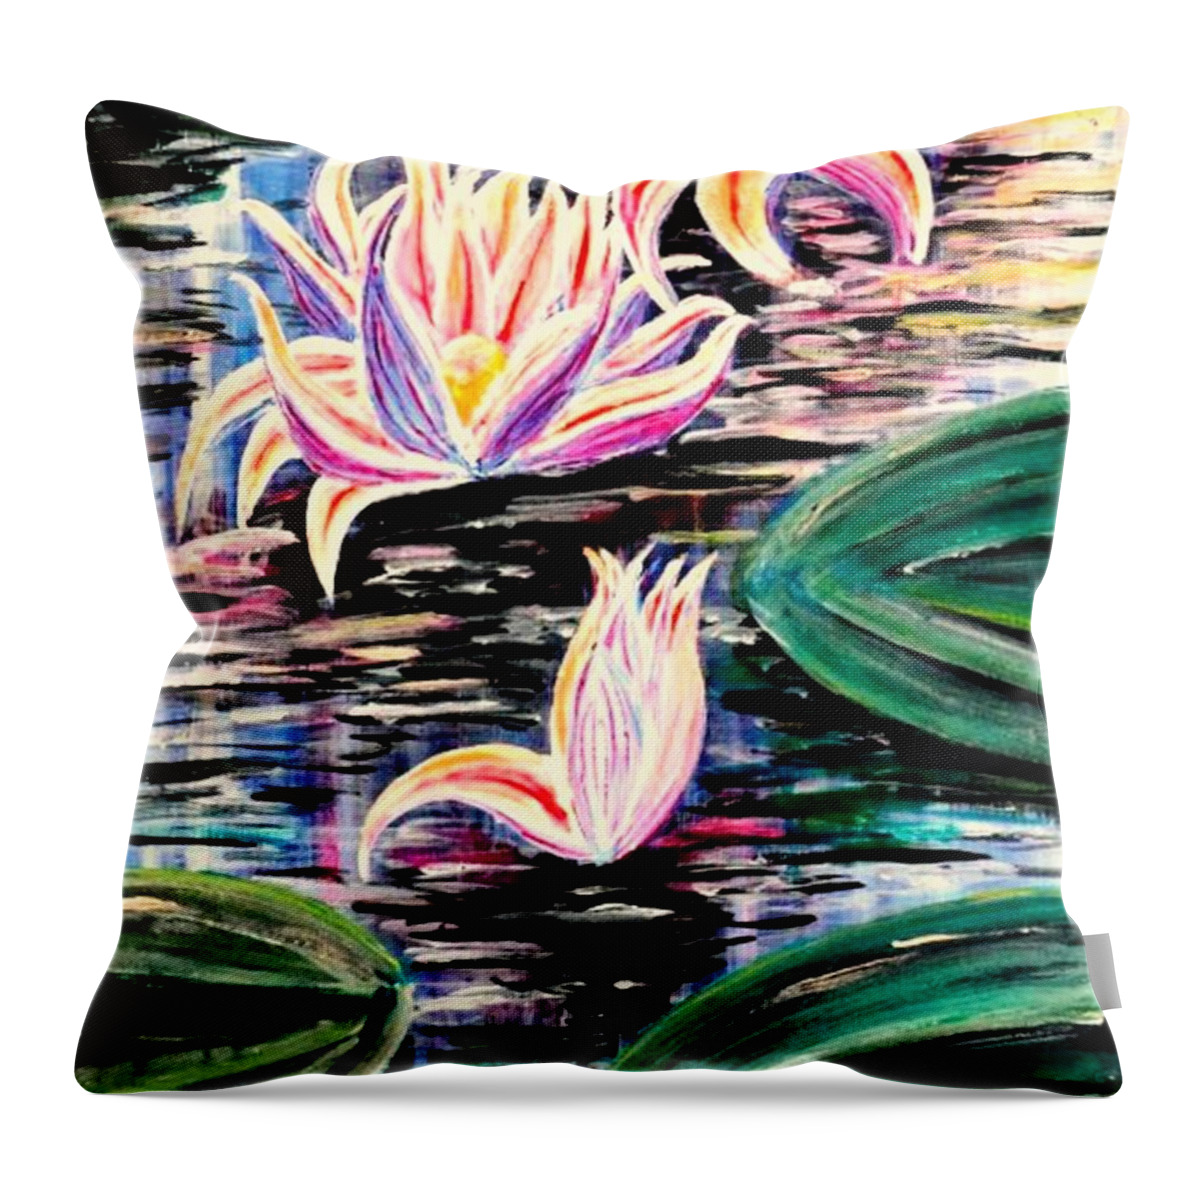 Art Throw Pillow featuring the painting Water Lilies Reaching High by Medea Ioseliani